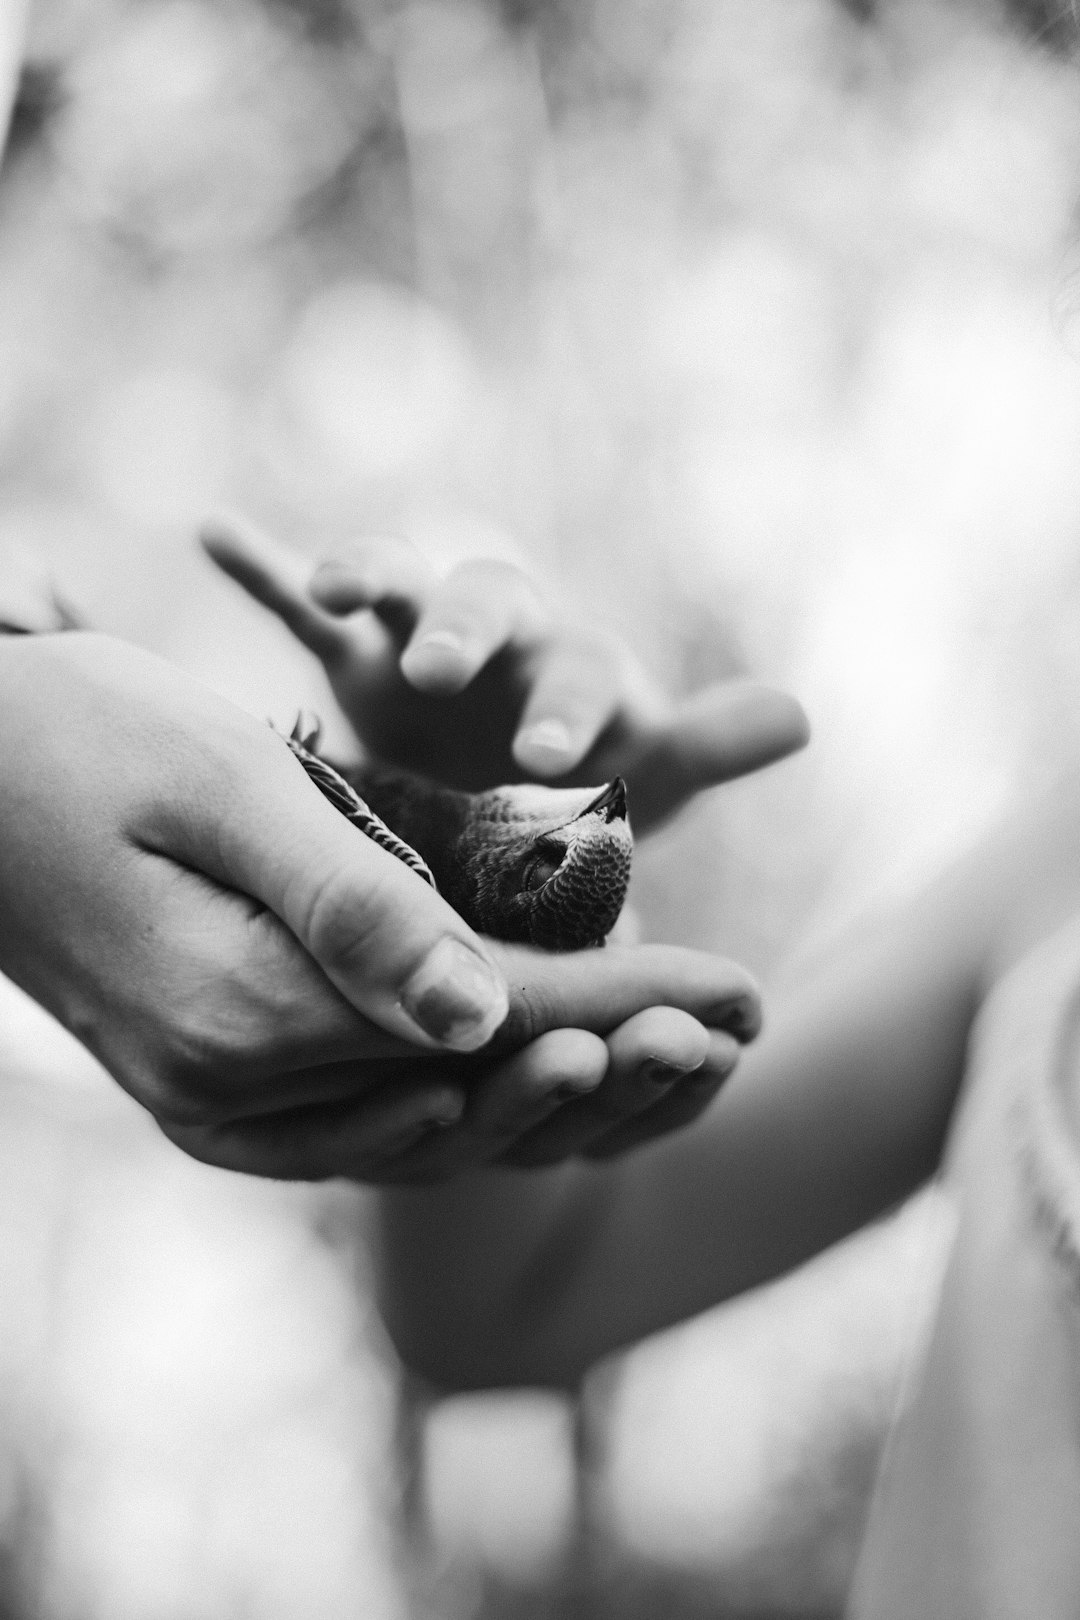 A small bird in the palm of two hands, black and white photography, grainy film, shallow depth of field, soft focus, natural lighting, warm tones, capturing a candid moment, an emotional connection between a human hand holding a little sparrow bird, a serene forest background creating a peaceful atmosphere. –ar 85:128